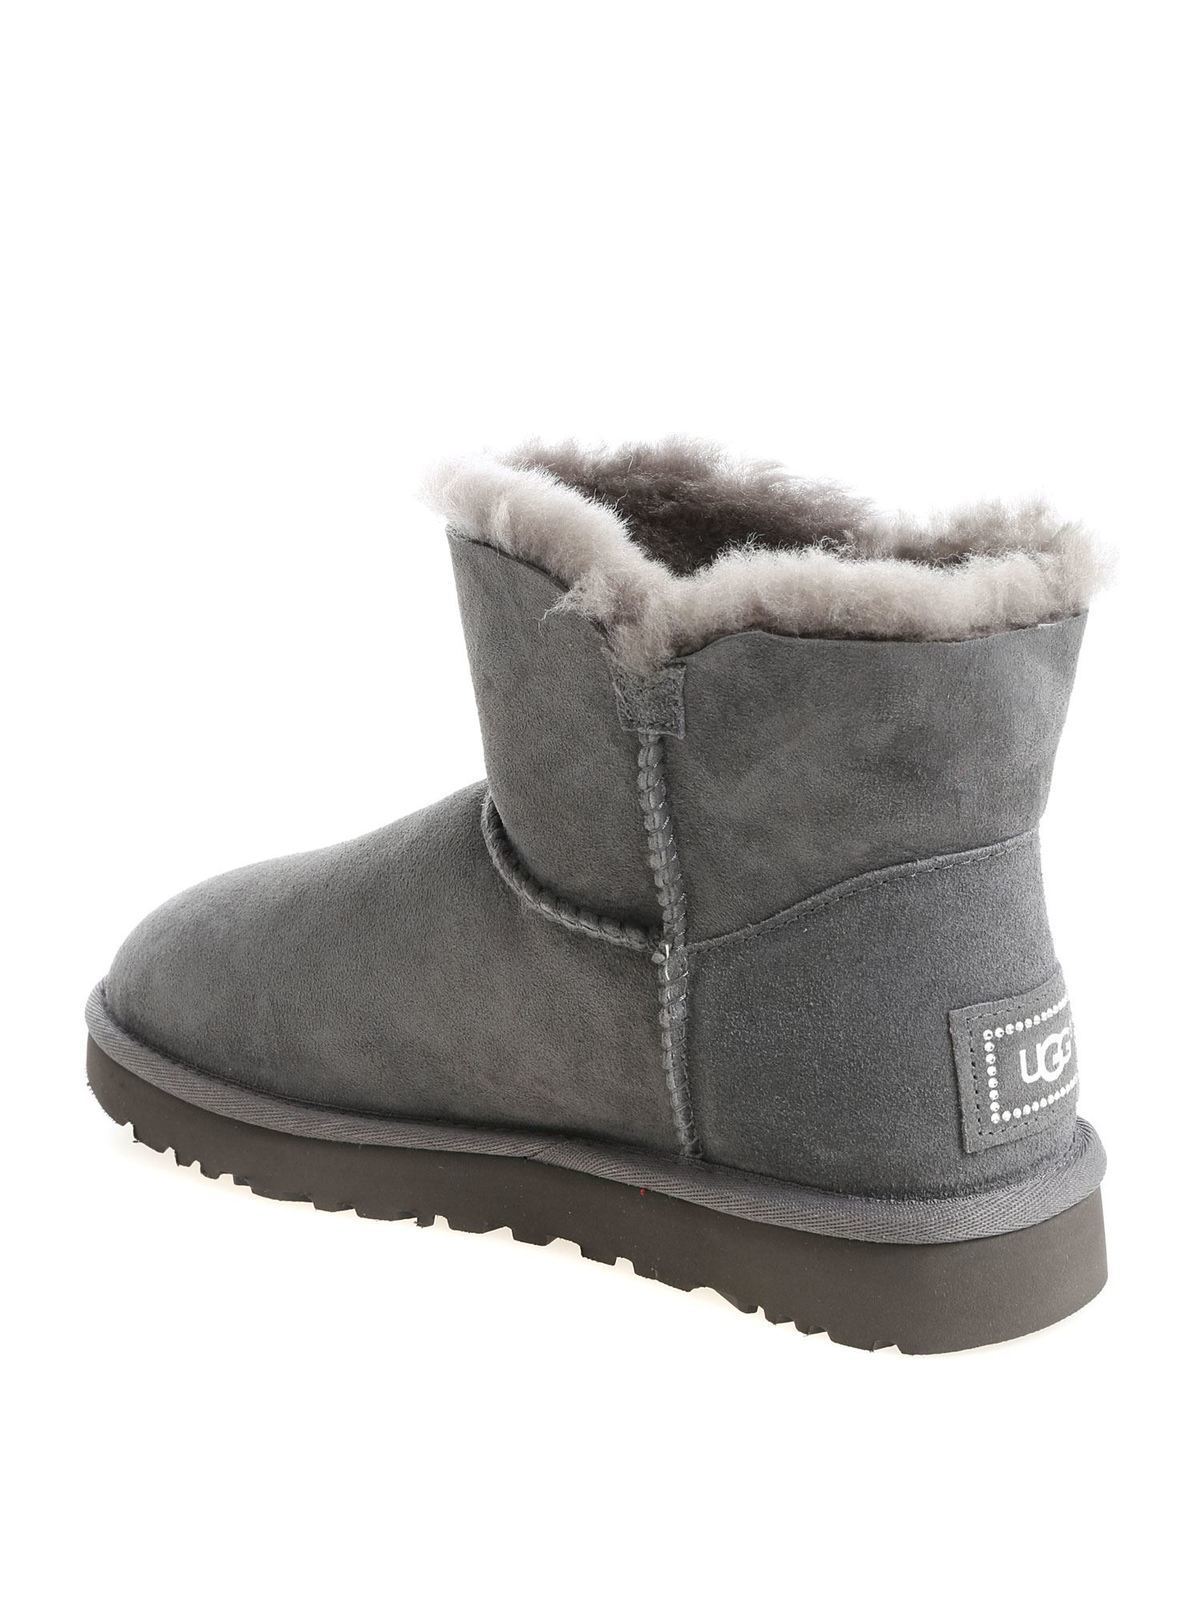 Bailey Button Bling grey ankle boots 